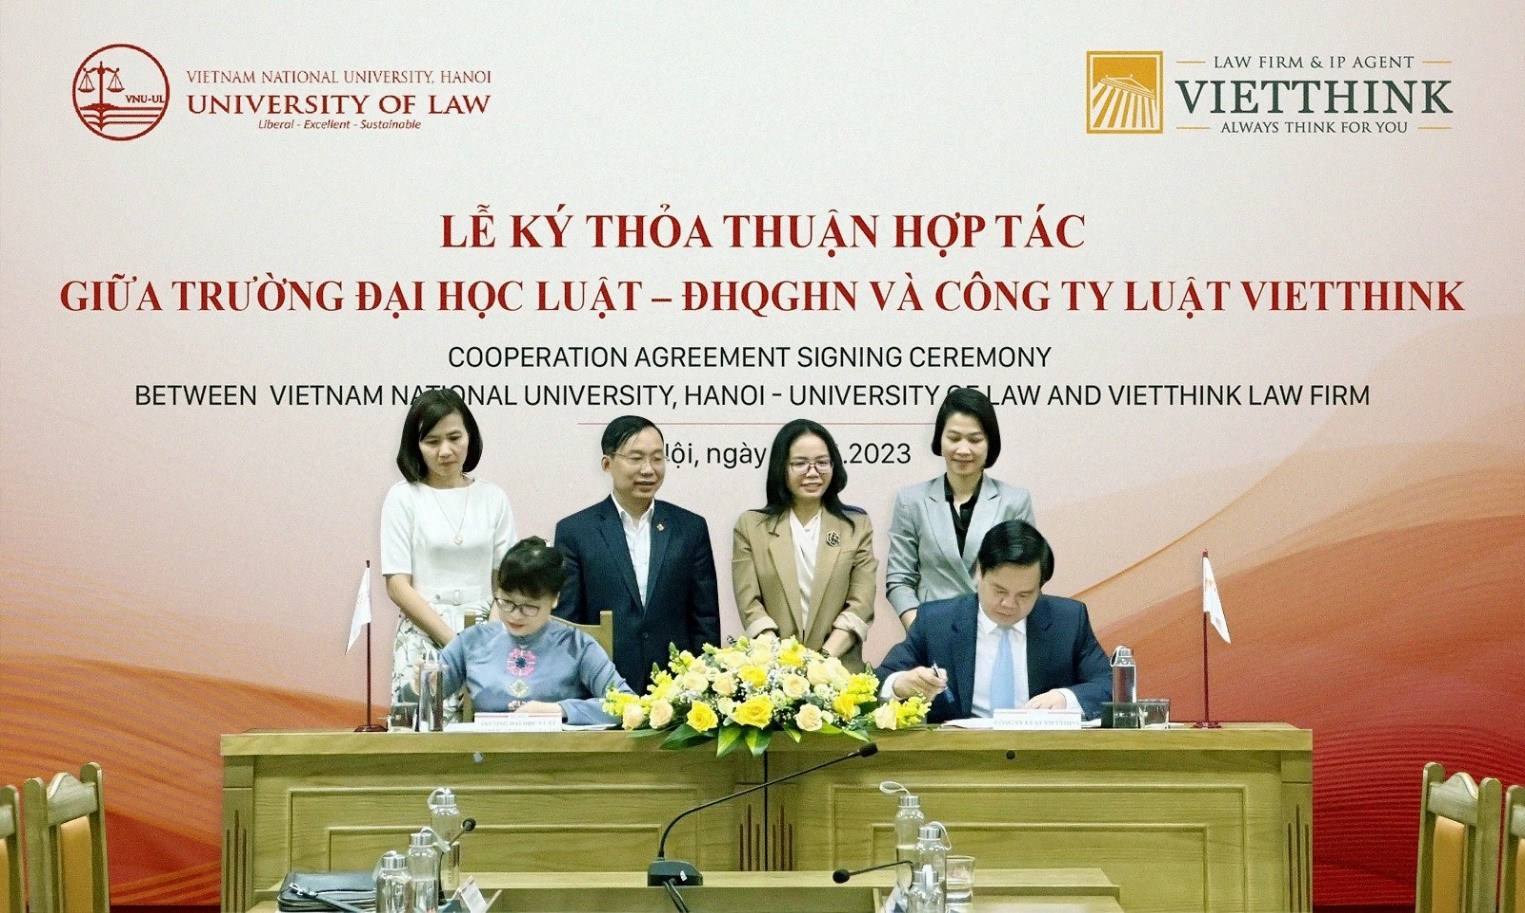 THE COOPERATION AGREEMENT SIGNING CEREMONY BETWEEN VIETNAM NATIONAL UNIVERSITY, HANOI – UNIVERSITY OF LAW AND VIETTHINK LAW FIRM